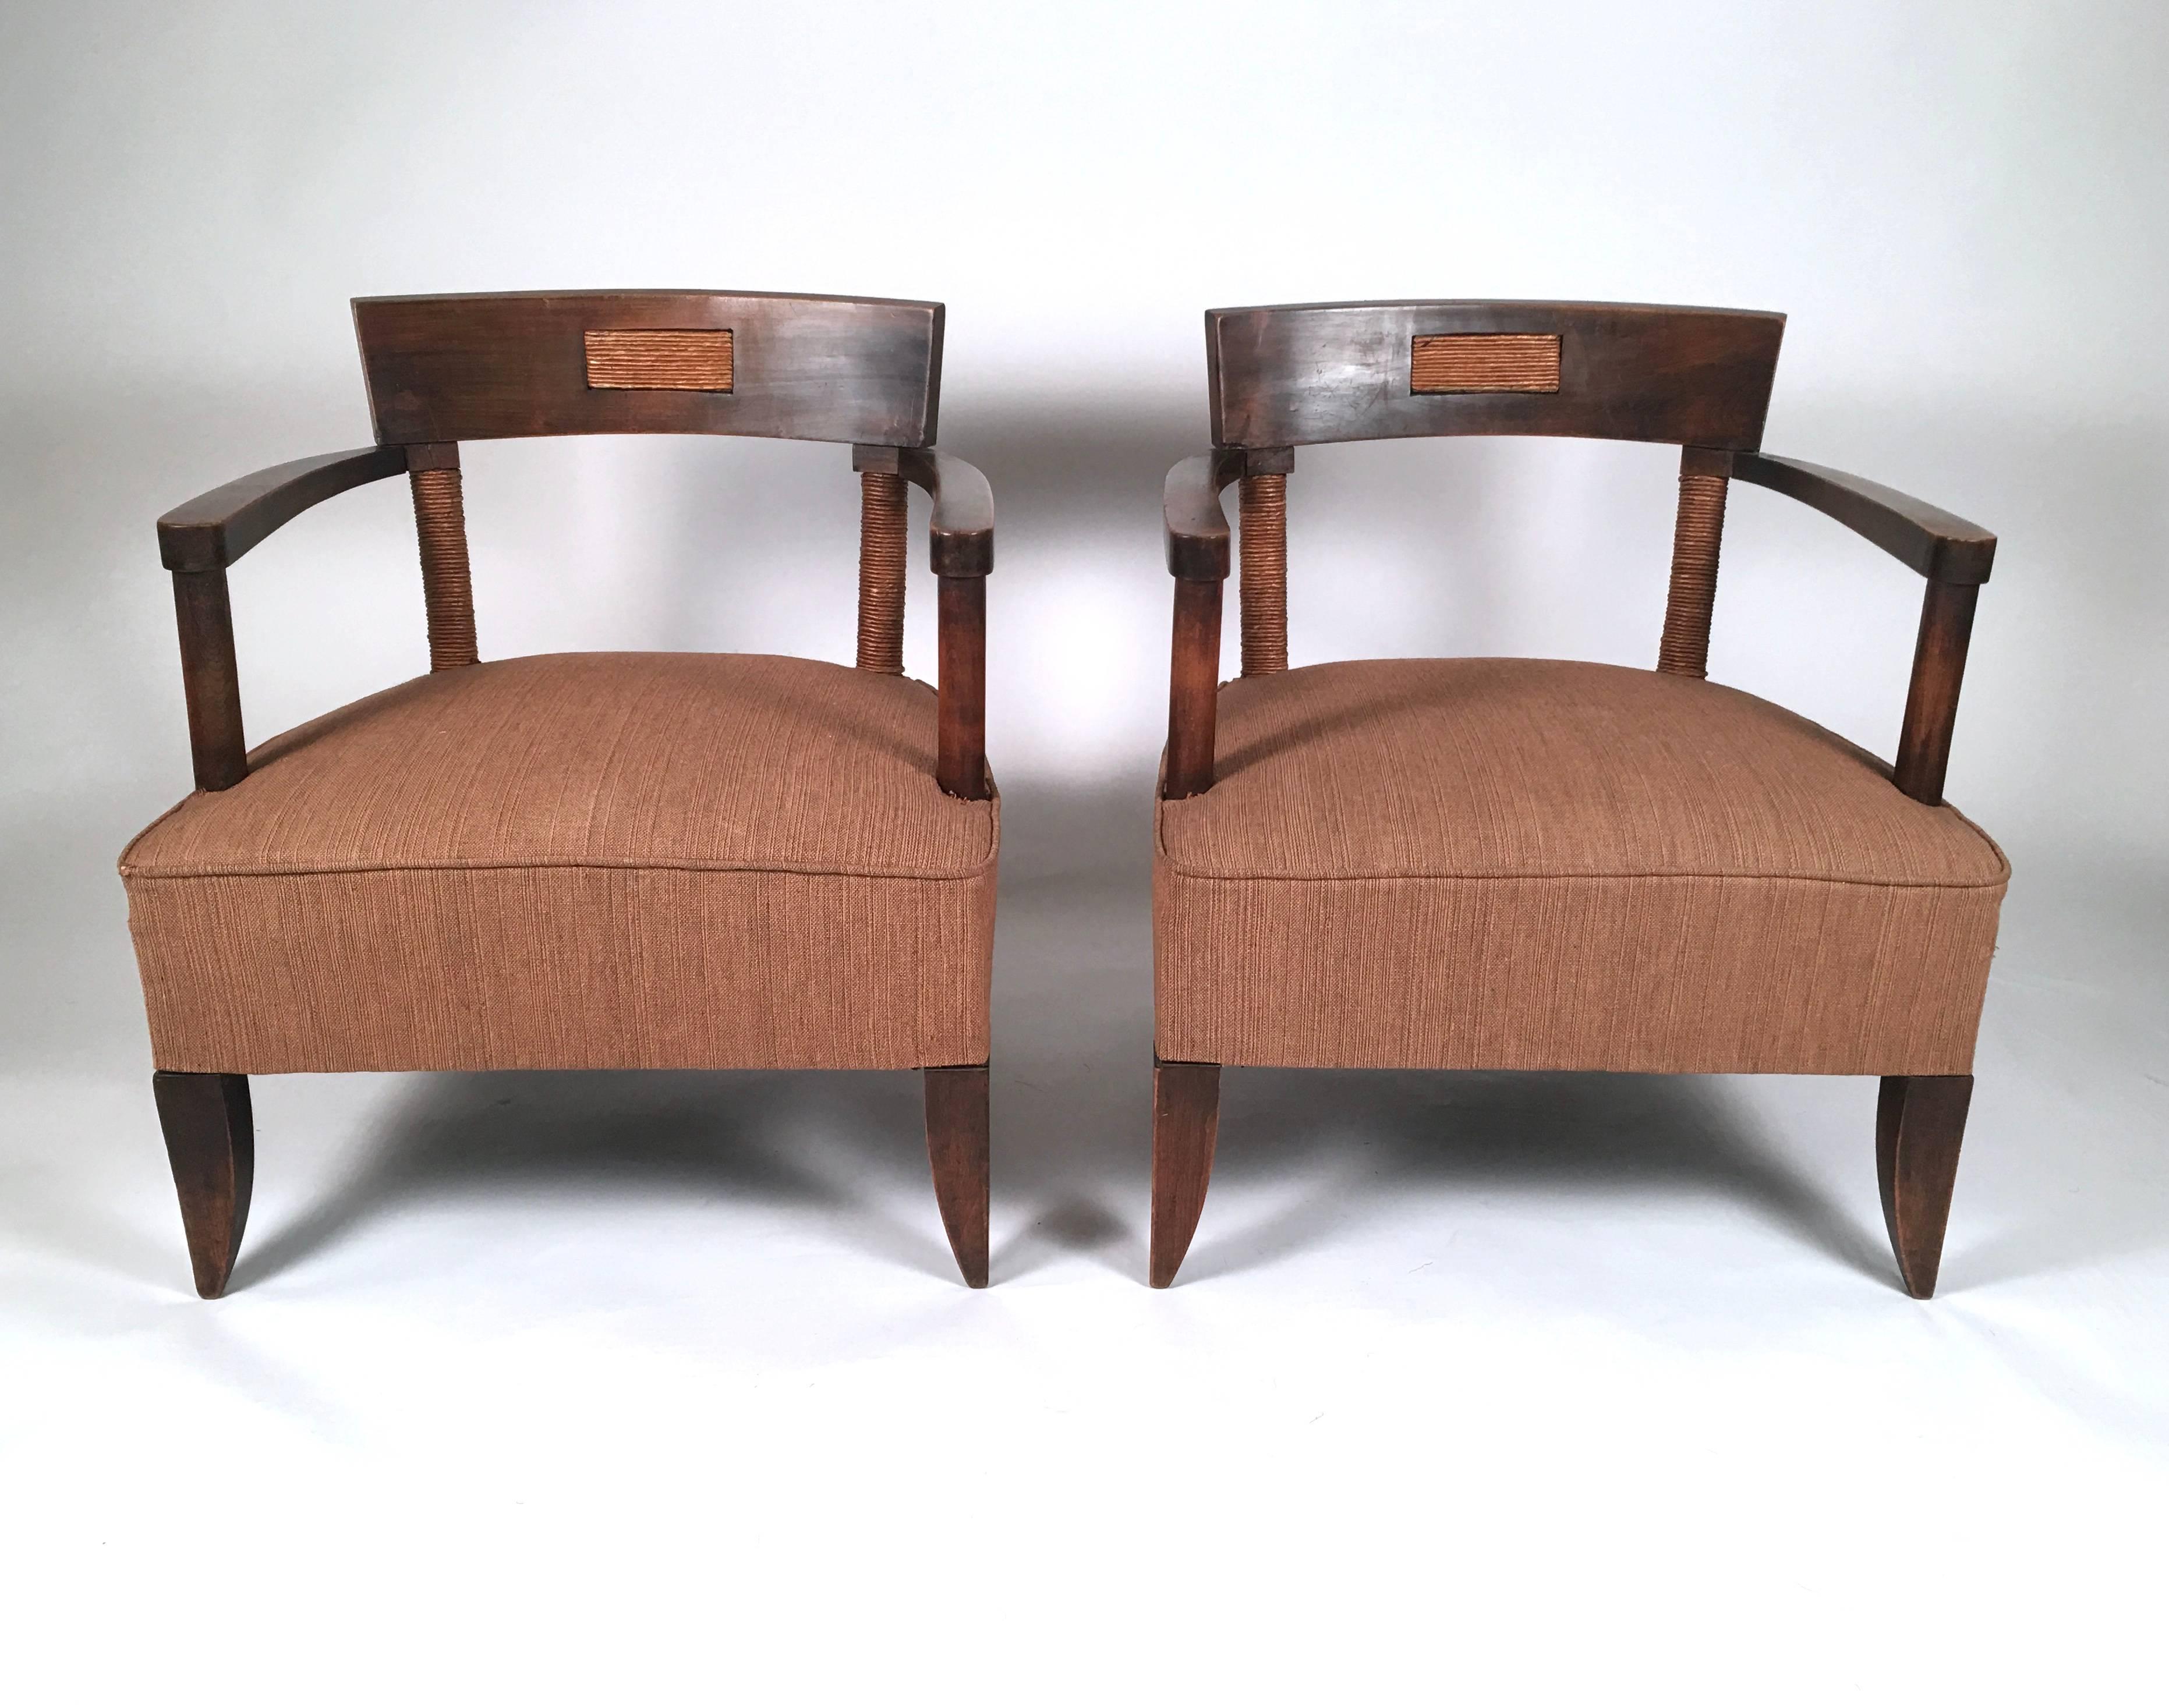 A pair of French Art Deco period African inspired armchairs in oak, the curved backs with inlaid paper cord rectangular panels in the back, with curved arm rests above two turned oak arm supports in the front and two round paper cord wrapped